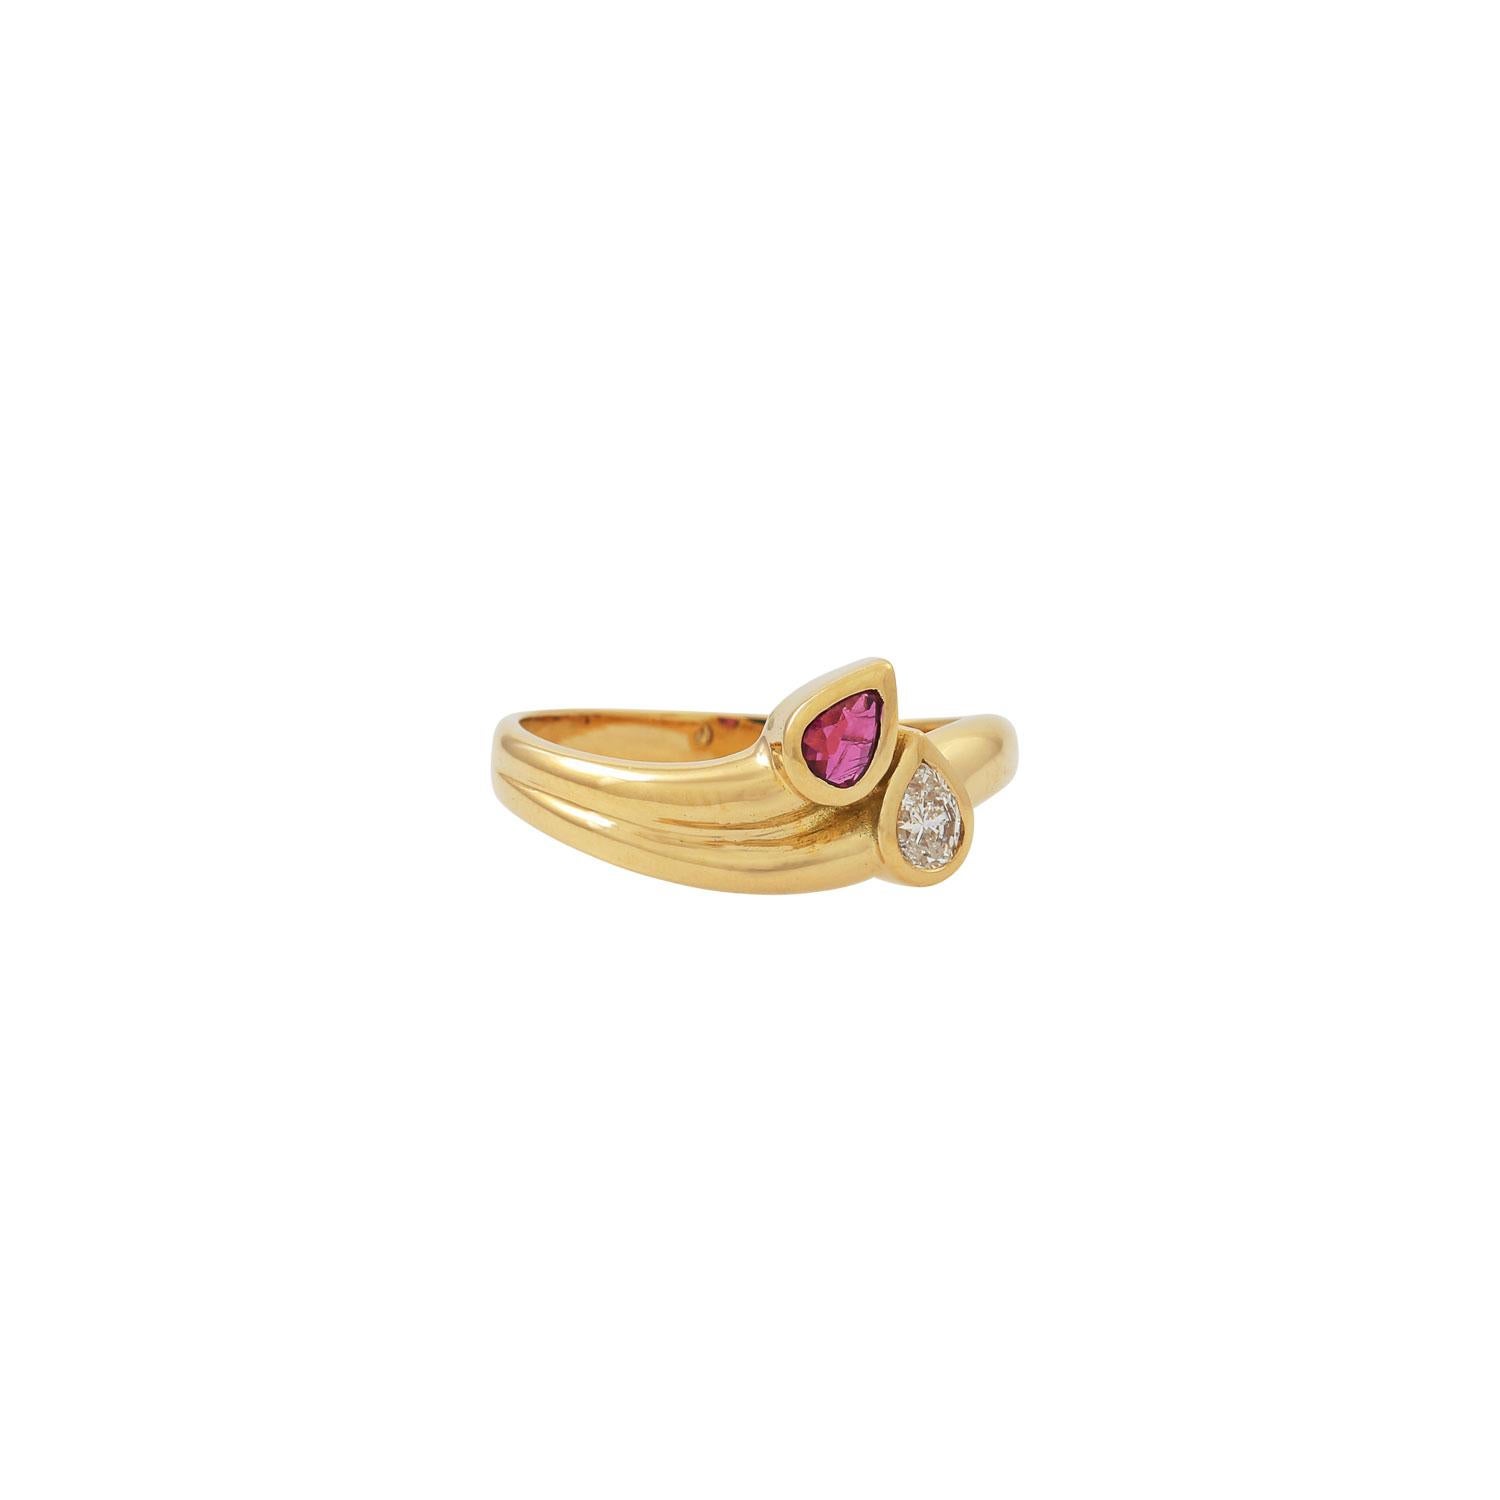 of approx. 0.12 ct, approx. GET (M)/VS, GG 18K, 4.3 gr, RW: 56/16, 20./21. Yep, slight signs of wear.

 Ring with ruby ​​and pear-cut diamond of approx. 0.12 ct, approx. TIN (M)/VS, 18K YG, 4.3 gr, ring size 56/16, 20th/21st century, minor signs of